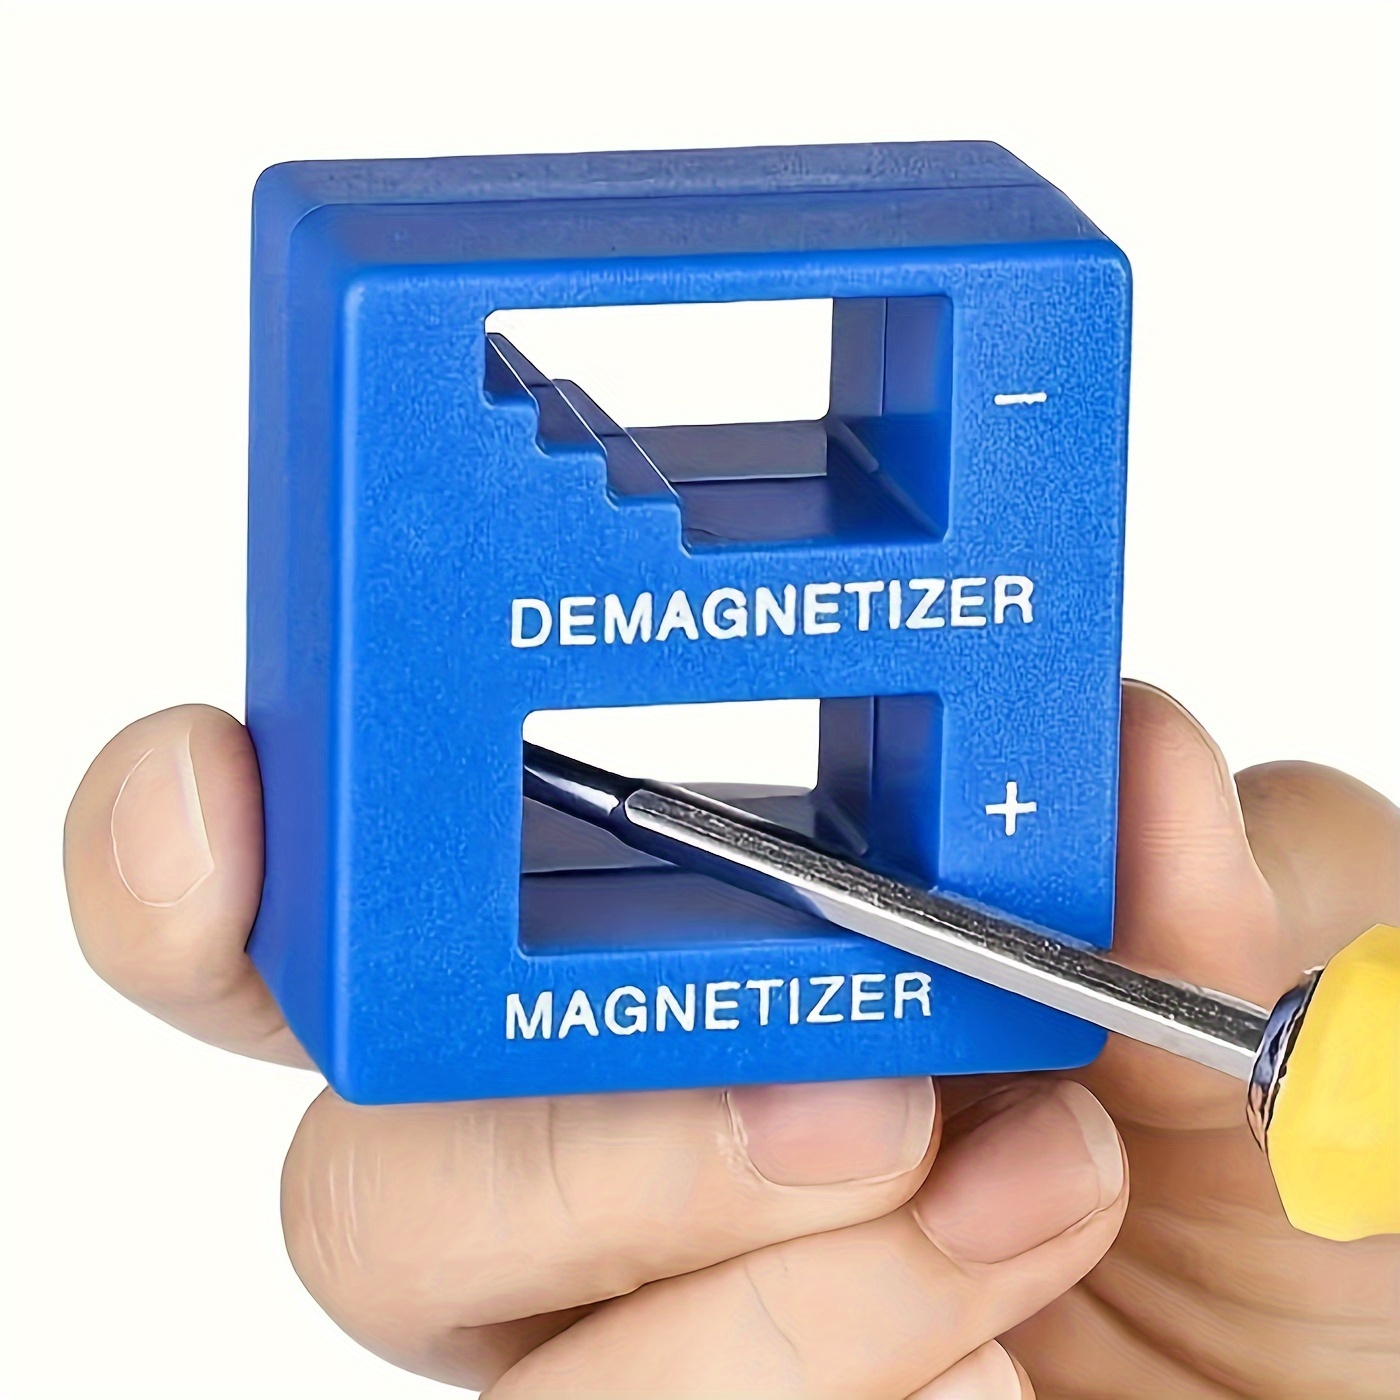 

Magnetizer And Demagnetizer, For Screwdrivers, Screws, Sockets, Nuts, Bolts, Nails, Drivers, Wrenches, Tweezers, And Other Steel Tools